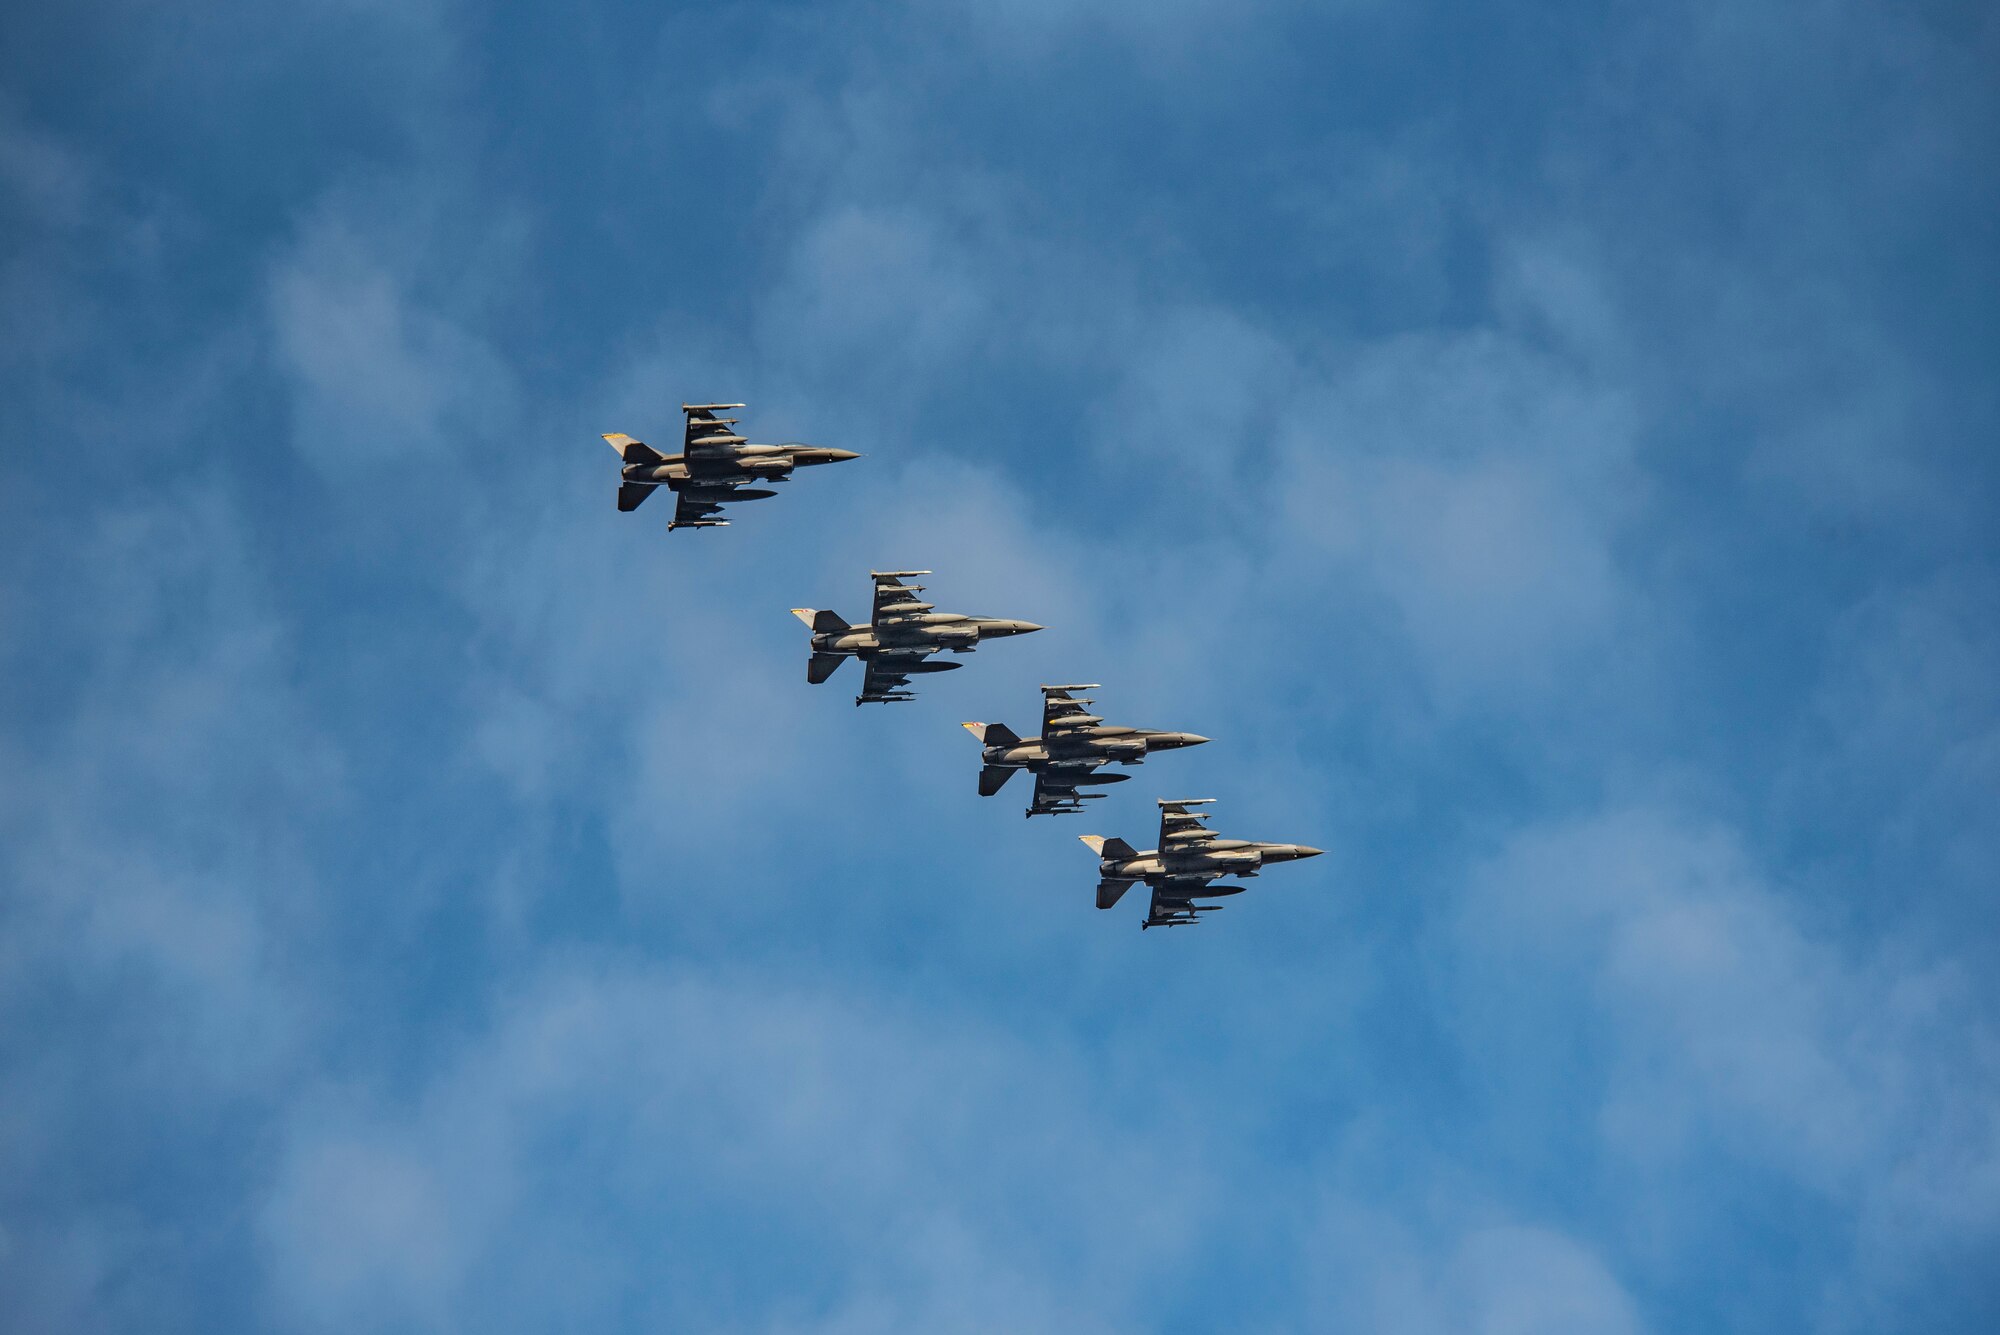 Image of four F-16 Vipers flying through the air.